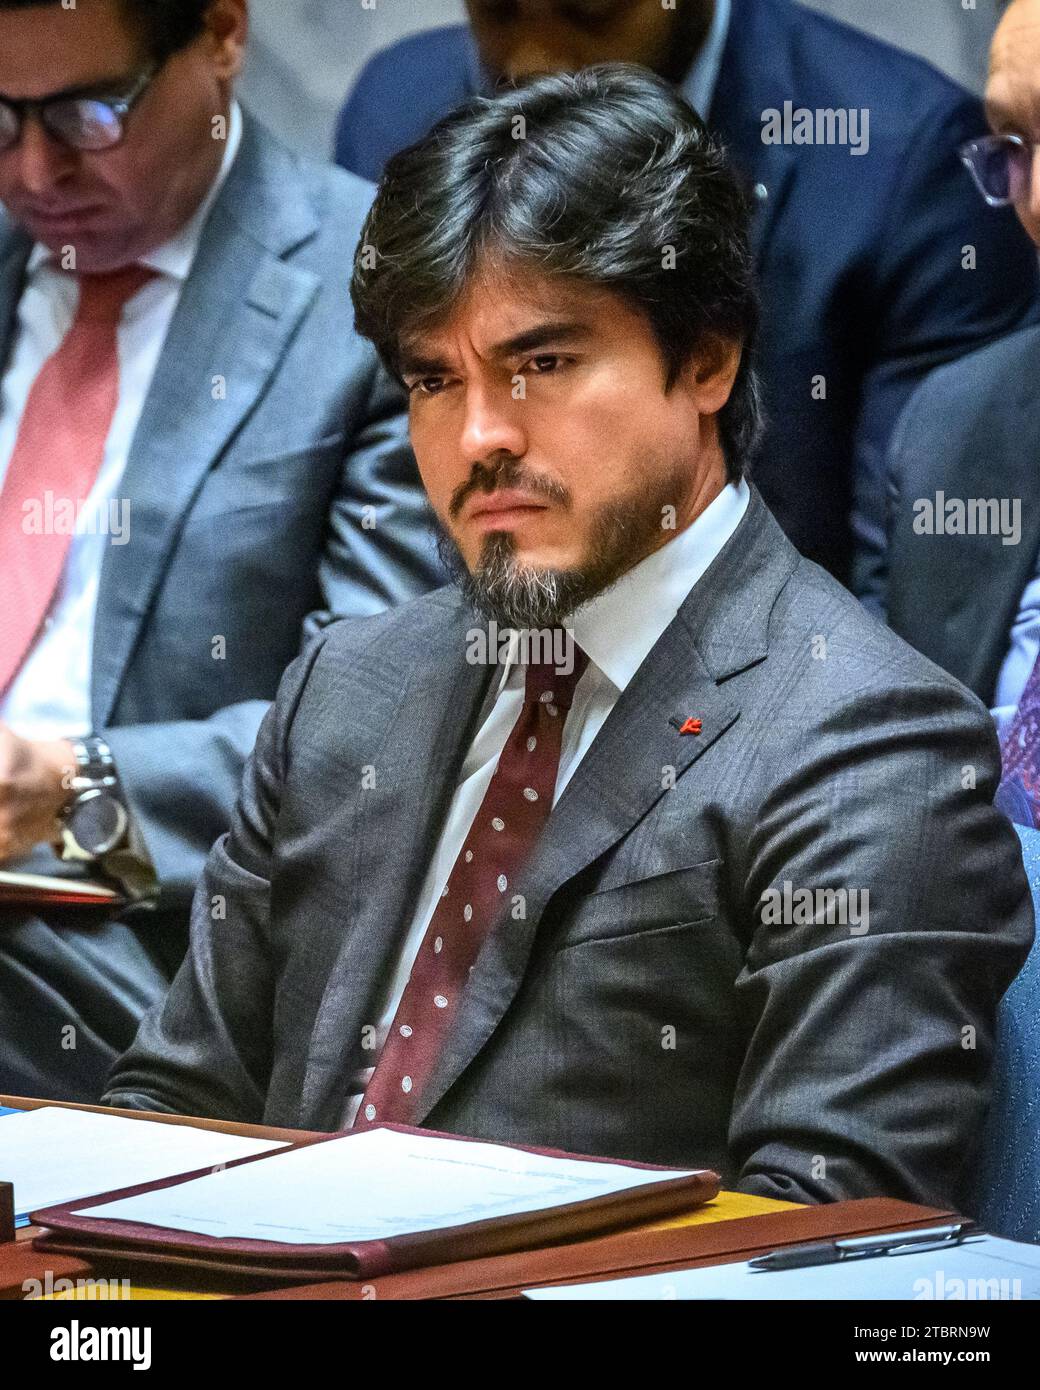 New York, USA, 8th Dec. 2023. Ambassador José de la Gasca of Ecuador, president of the Security Council in December attends a meeting of the UN Security Council on the situation in the Middle East, including the Palestinian question. Credit: Enrique Shore/Alamy Live News Stock Photo